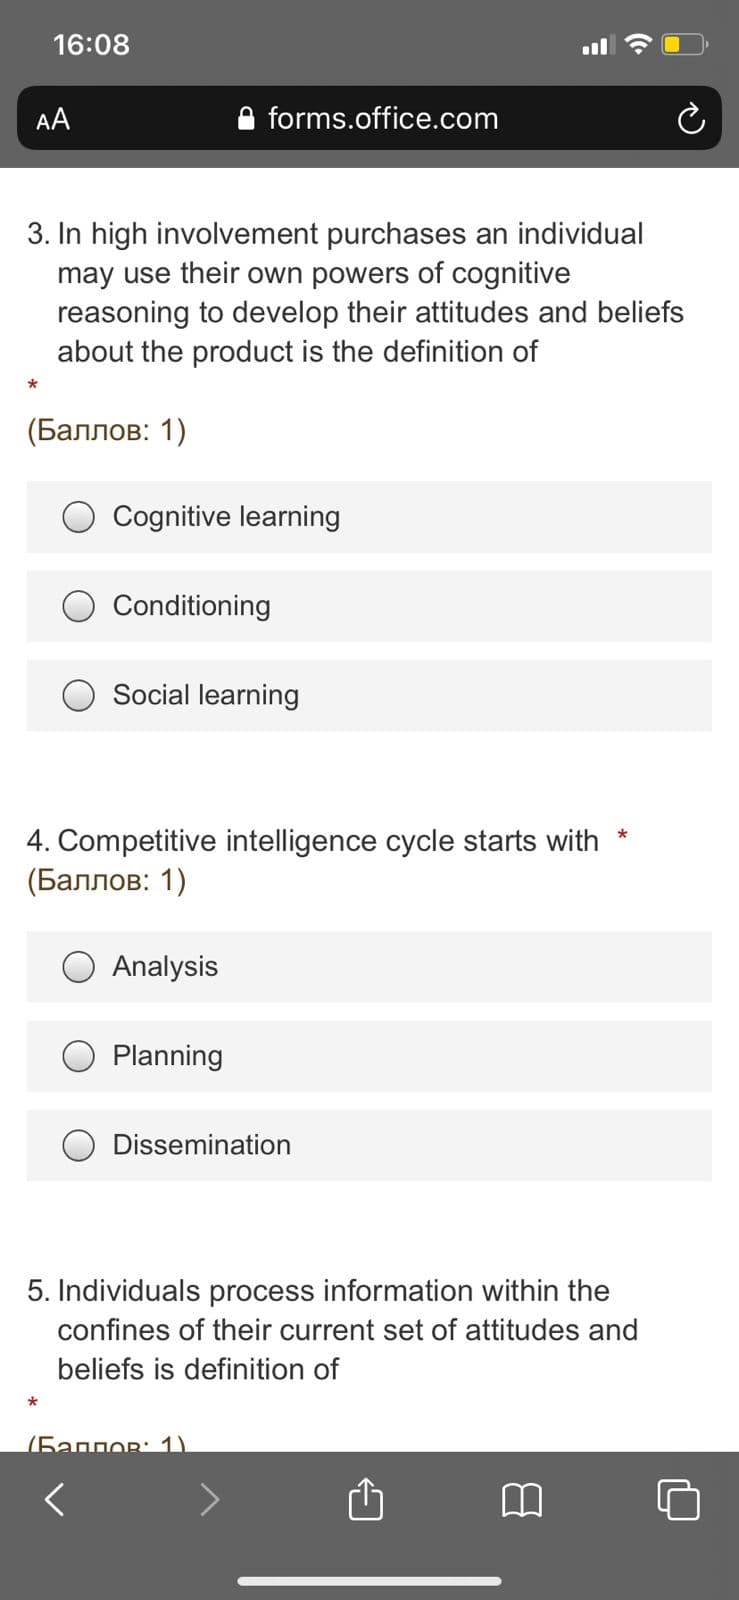 16:08
AA
forms.office.com
3. In high involvement purchases an individual
may use their own powers of cognitive
reasoning to develop their attitudes and beliefs
about the product is the definition of
(Баллов: 1)
Cognitive learning
Conditioning
Social learning
4. Competitive intelligence cycle starts with *
(Баллов: 1)
Analysis
Planning
Dissemination
5. Individuals process information within the
confines of their current set of attitudes and
beliefs is definition of
(5aggor: 1)
